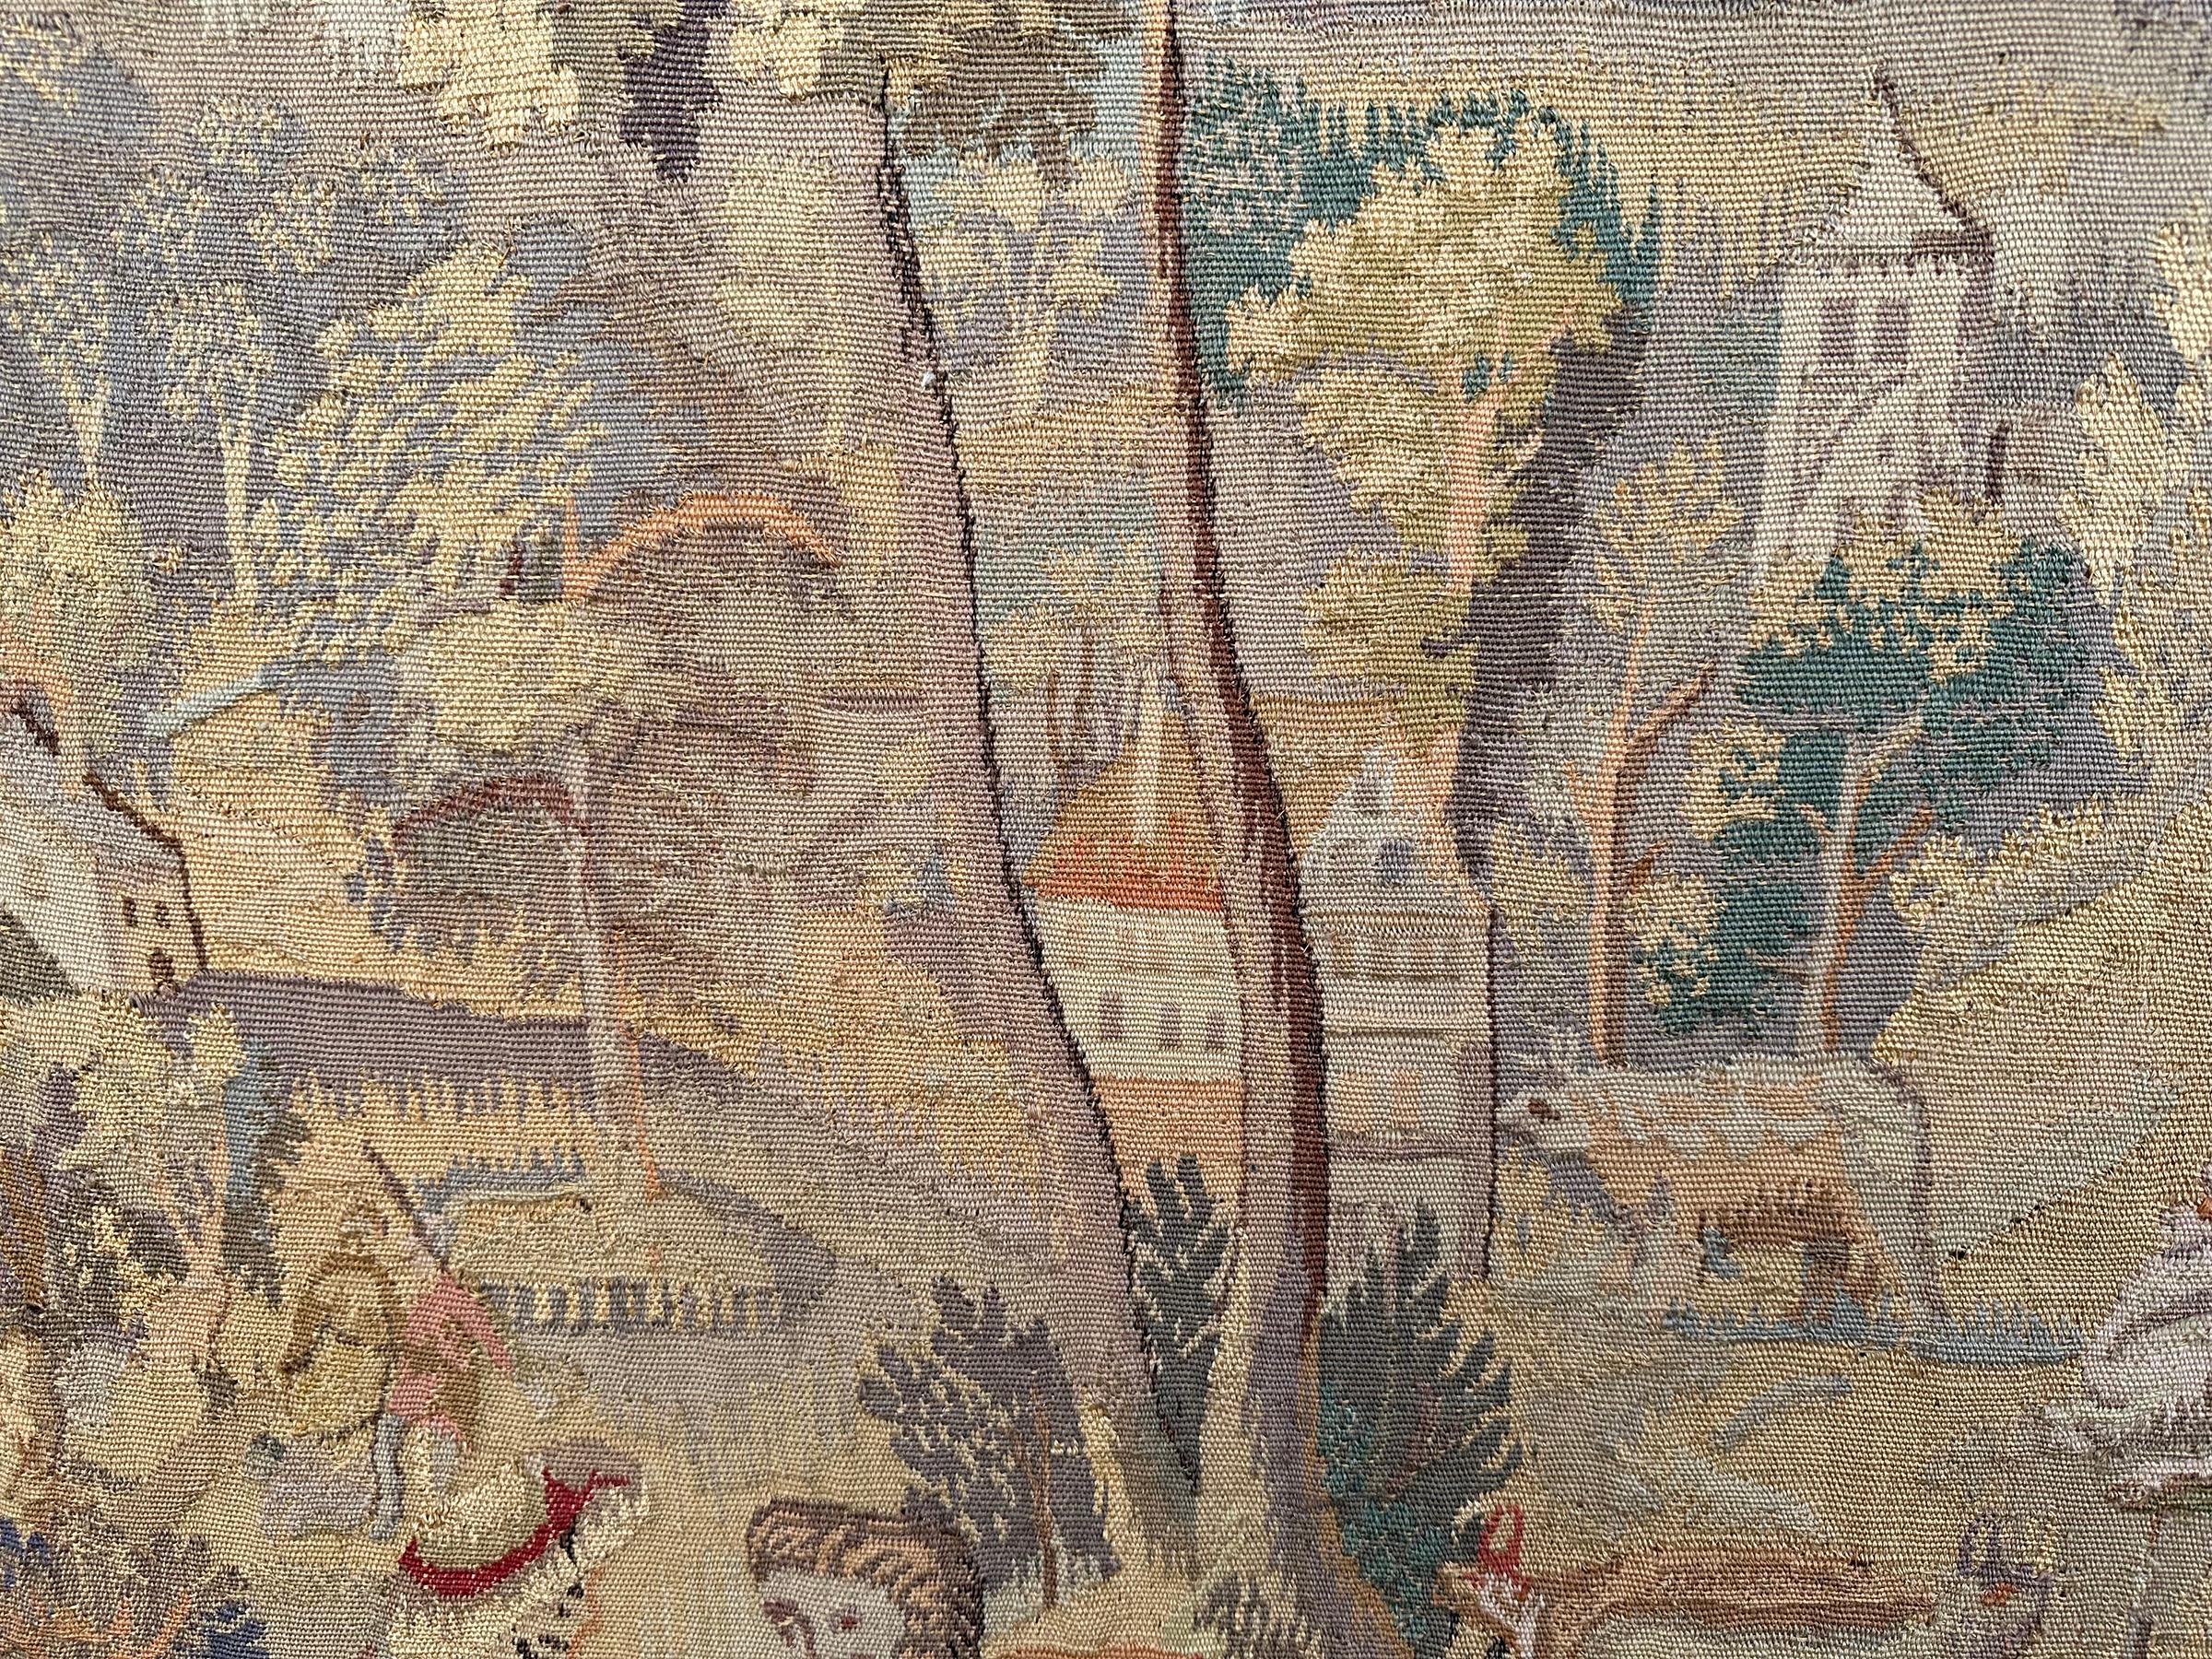 Early 20th Century 1920 Antique French Tapestry Wool & Silk Village Scene Framed 3x4 102cm x 122cm For Sale